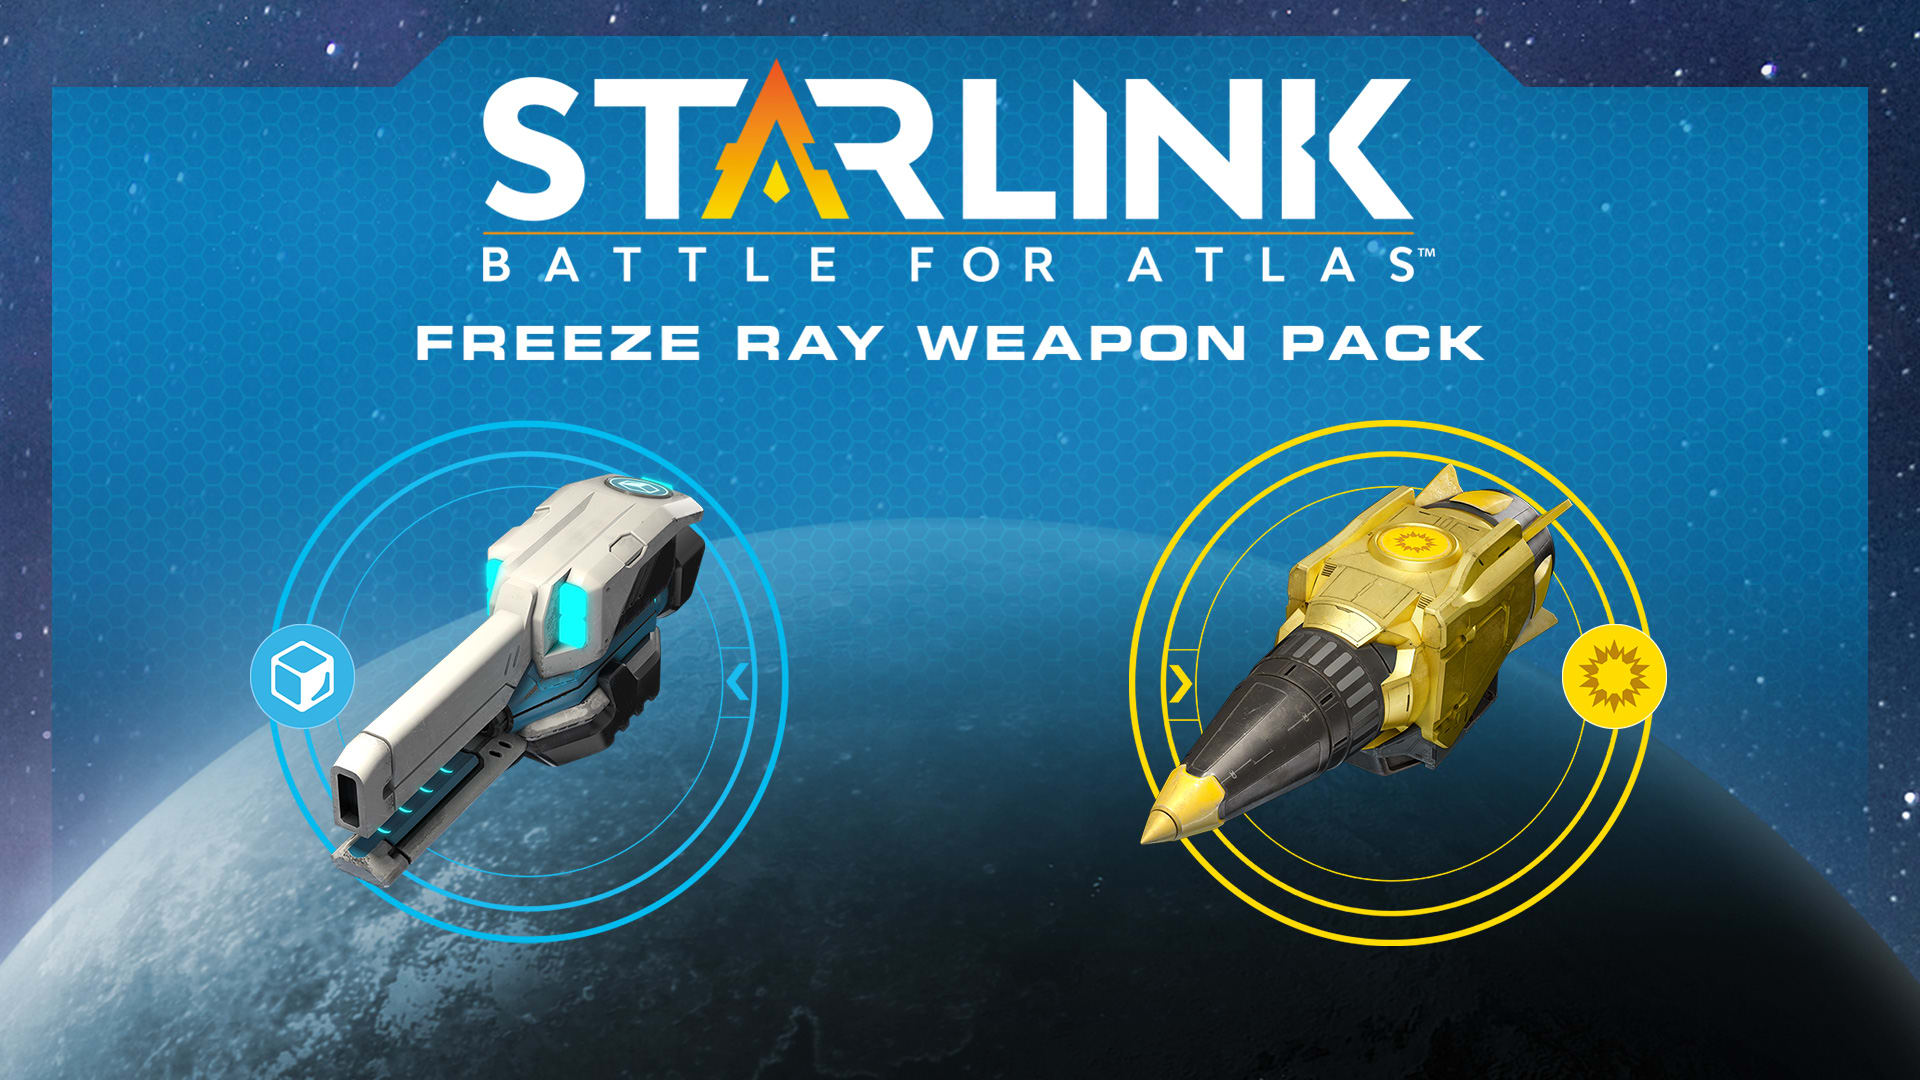 Starlink: Battle for Atlas Digital Freeze Ray Weapon Pack